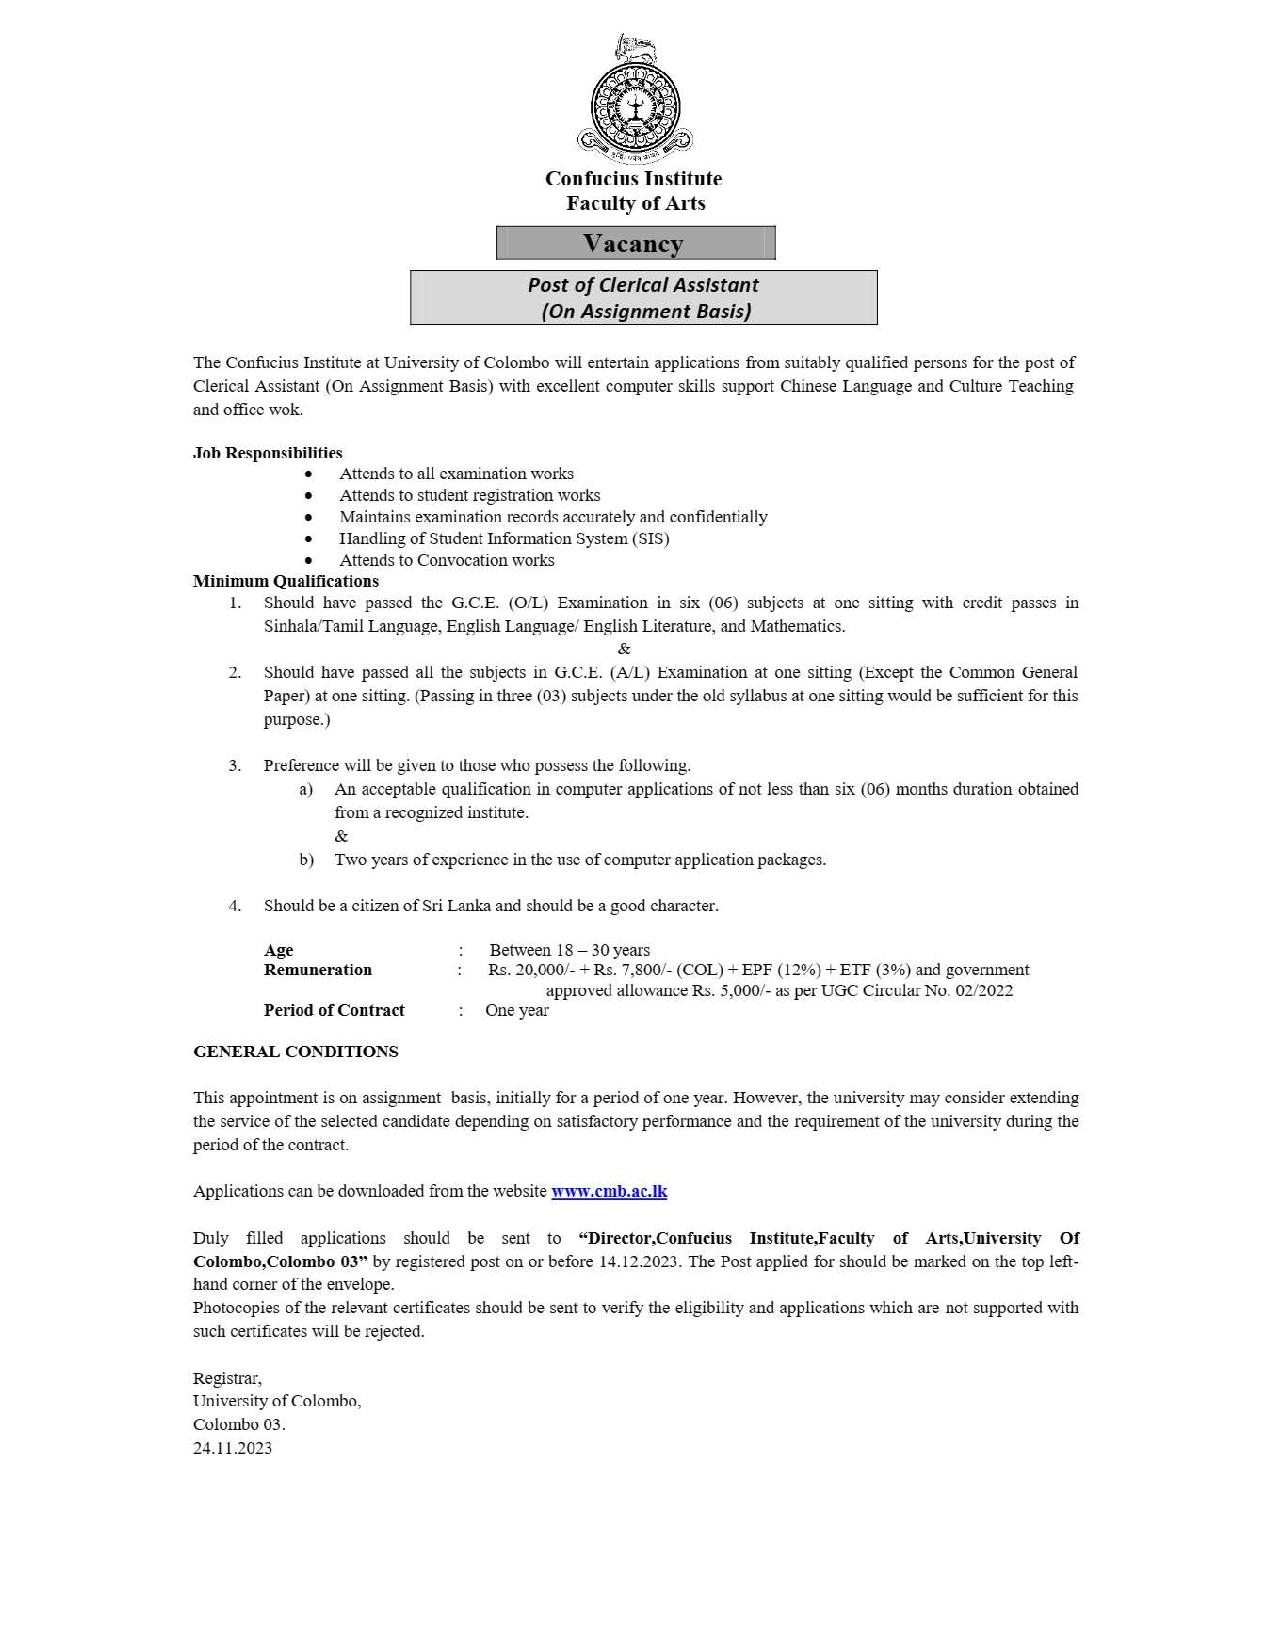 clerical Assistant - University of Colombo